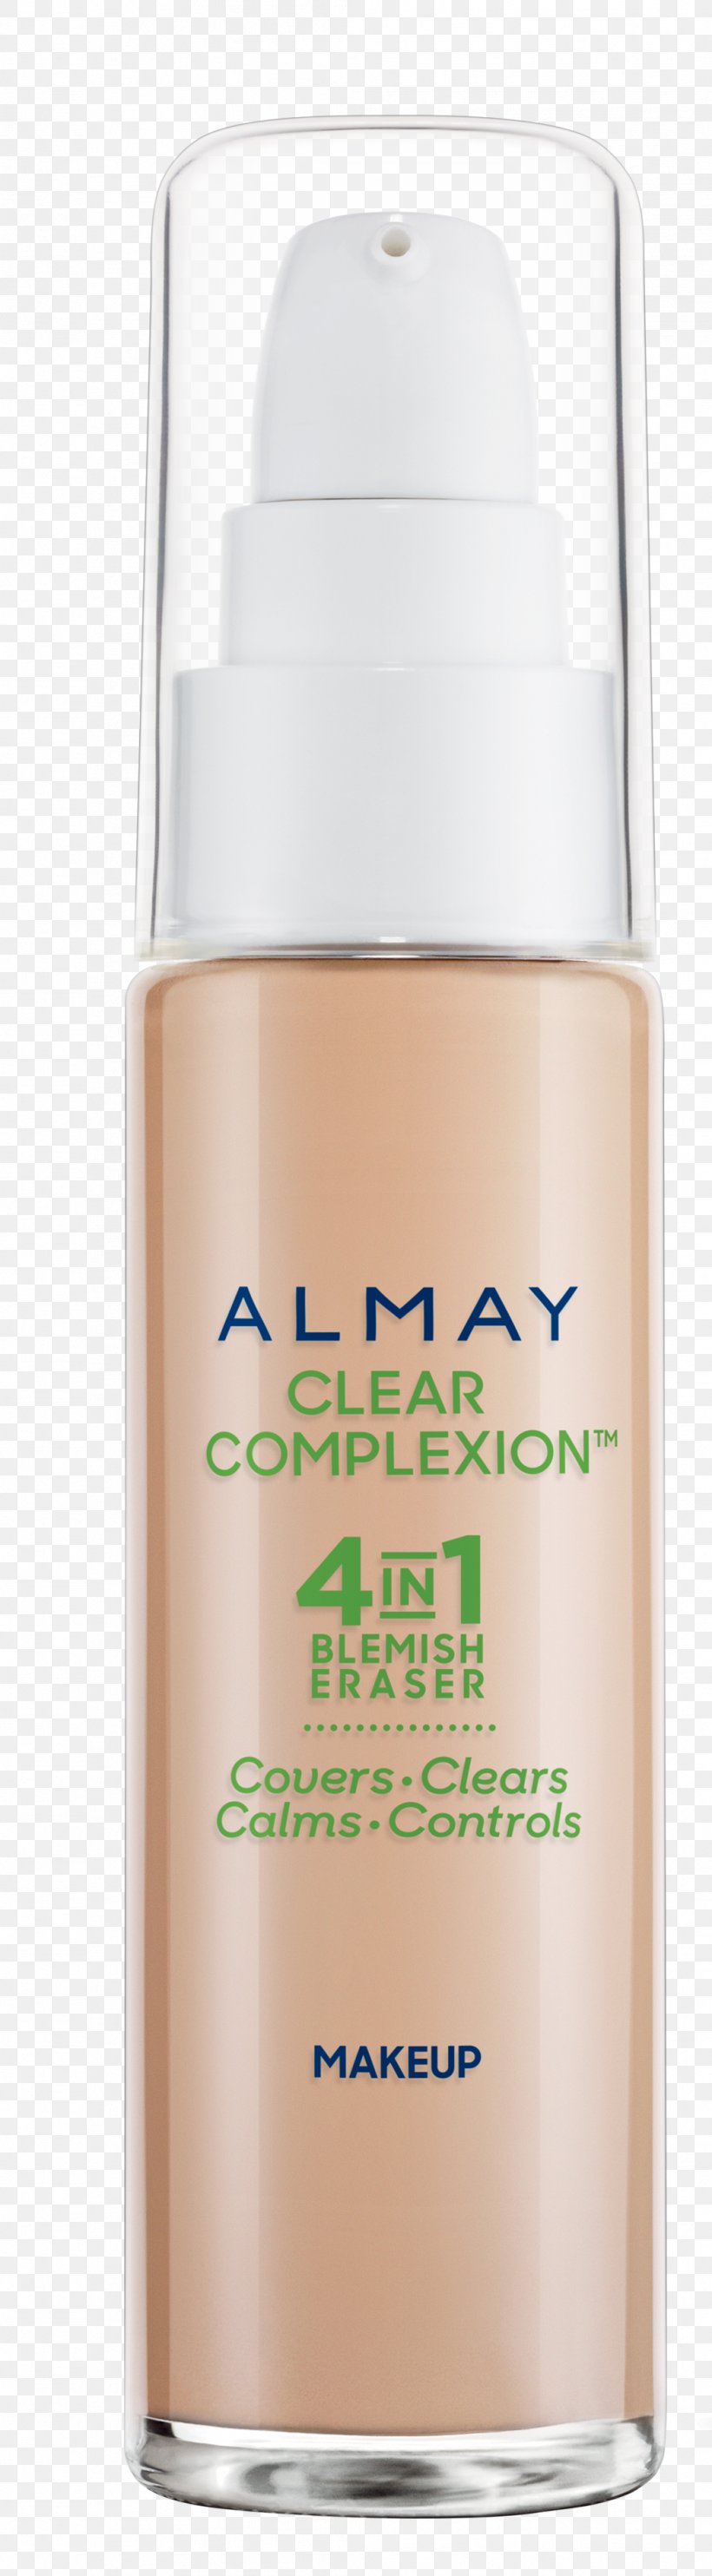 Almay Clear Complexion Makeup Cosmetics Lotion Revlon, PNG, 1044x3780px, Almay, Beige, Cleanser, Complexion, Cosmetics Download Free